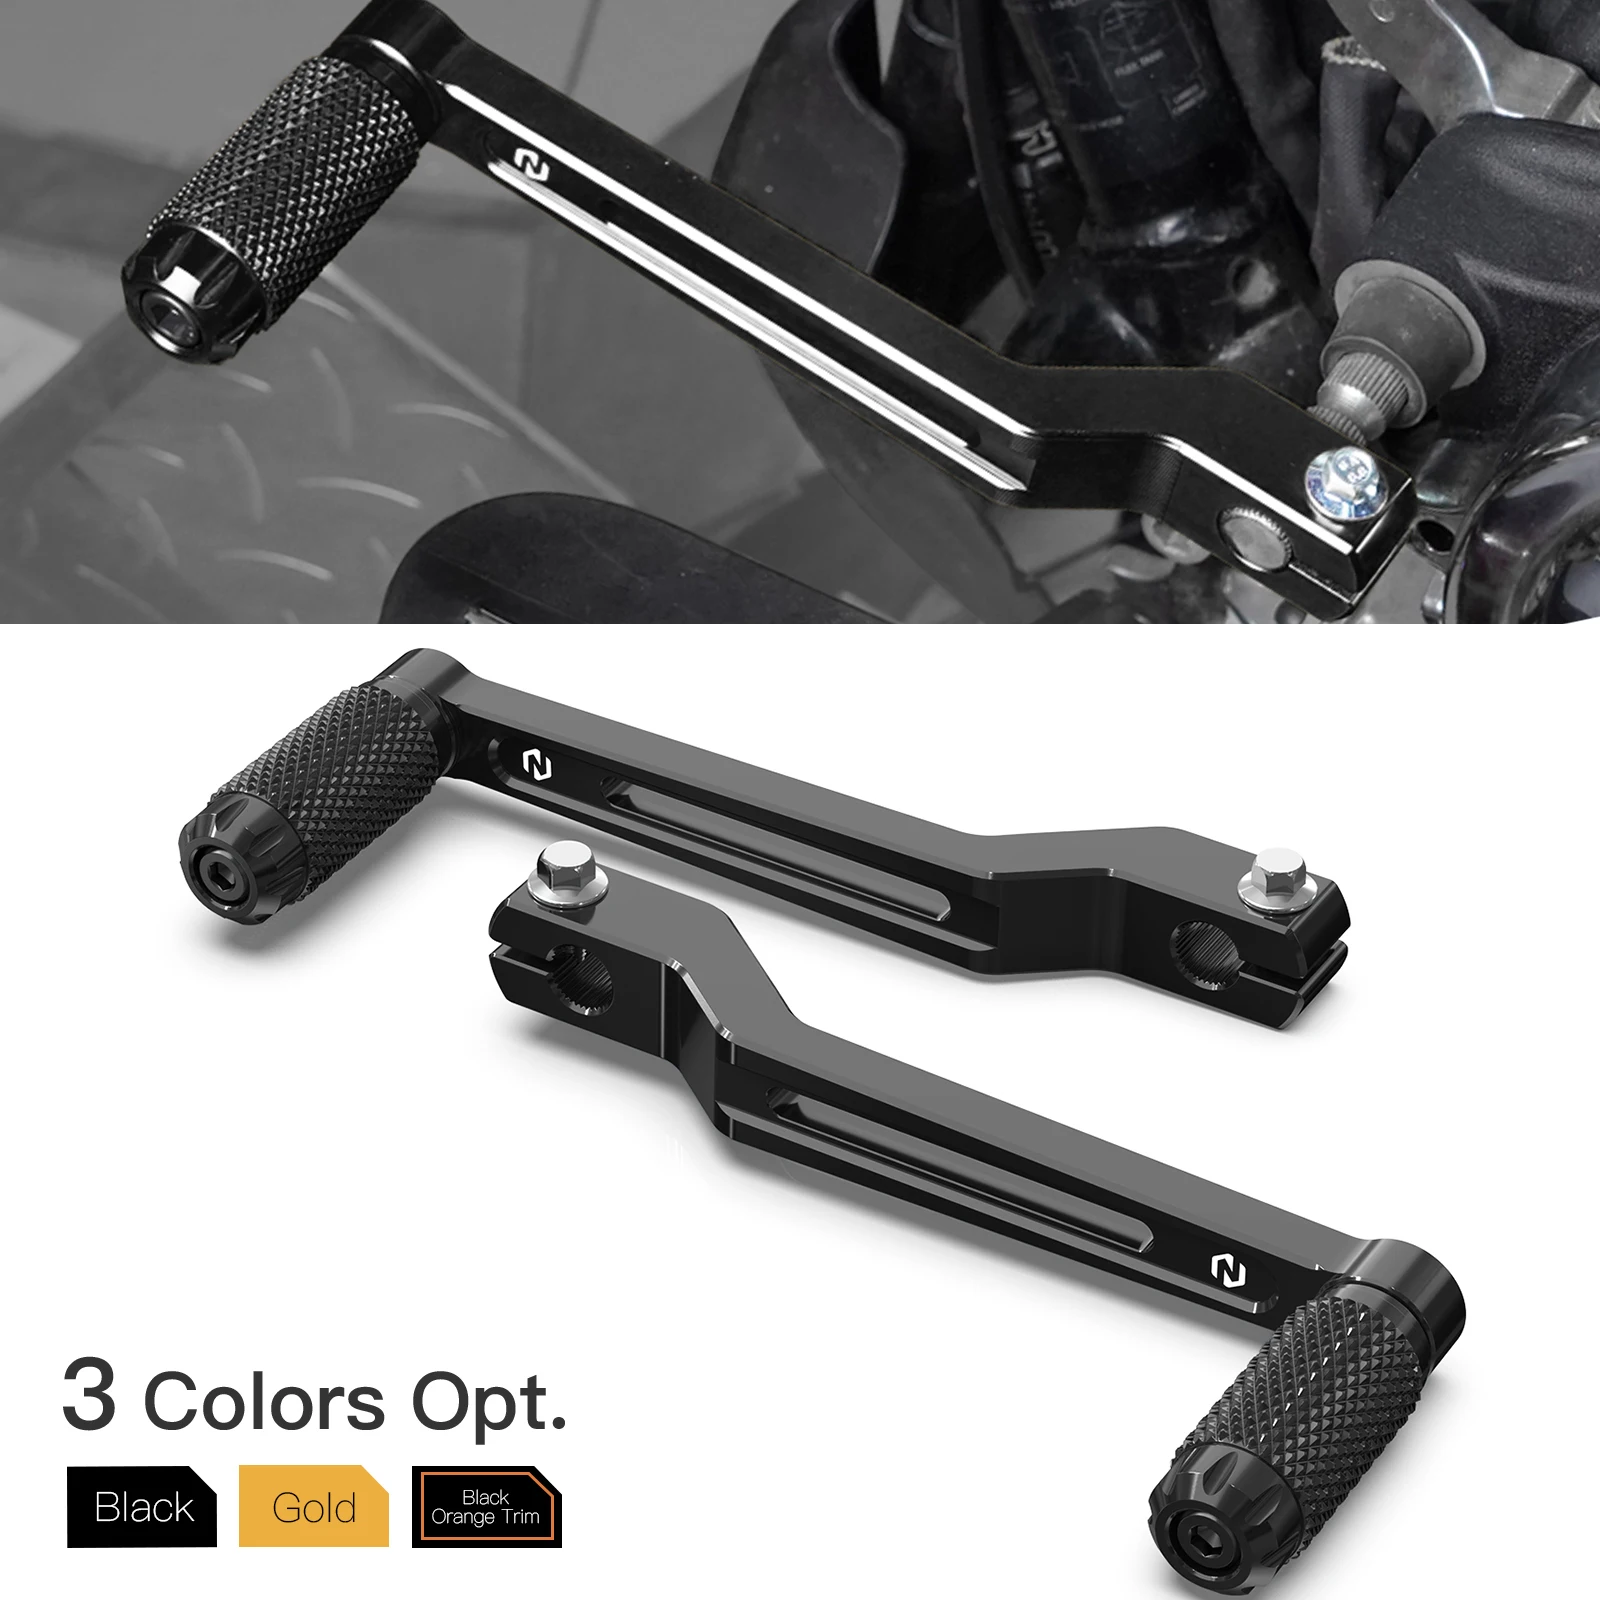 Gear Shift Lever Shifter Levers For Harley Softail Fat Boy Touring Road King - £70.51 GBP